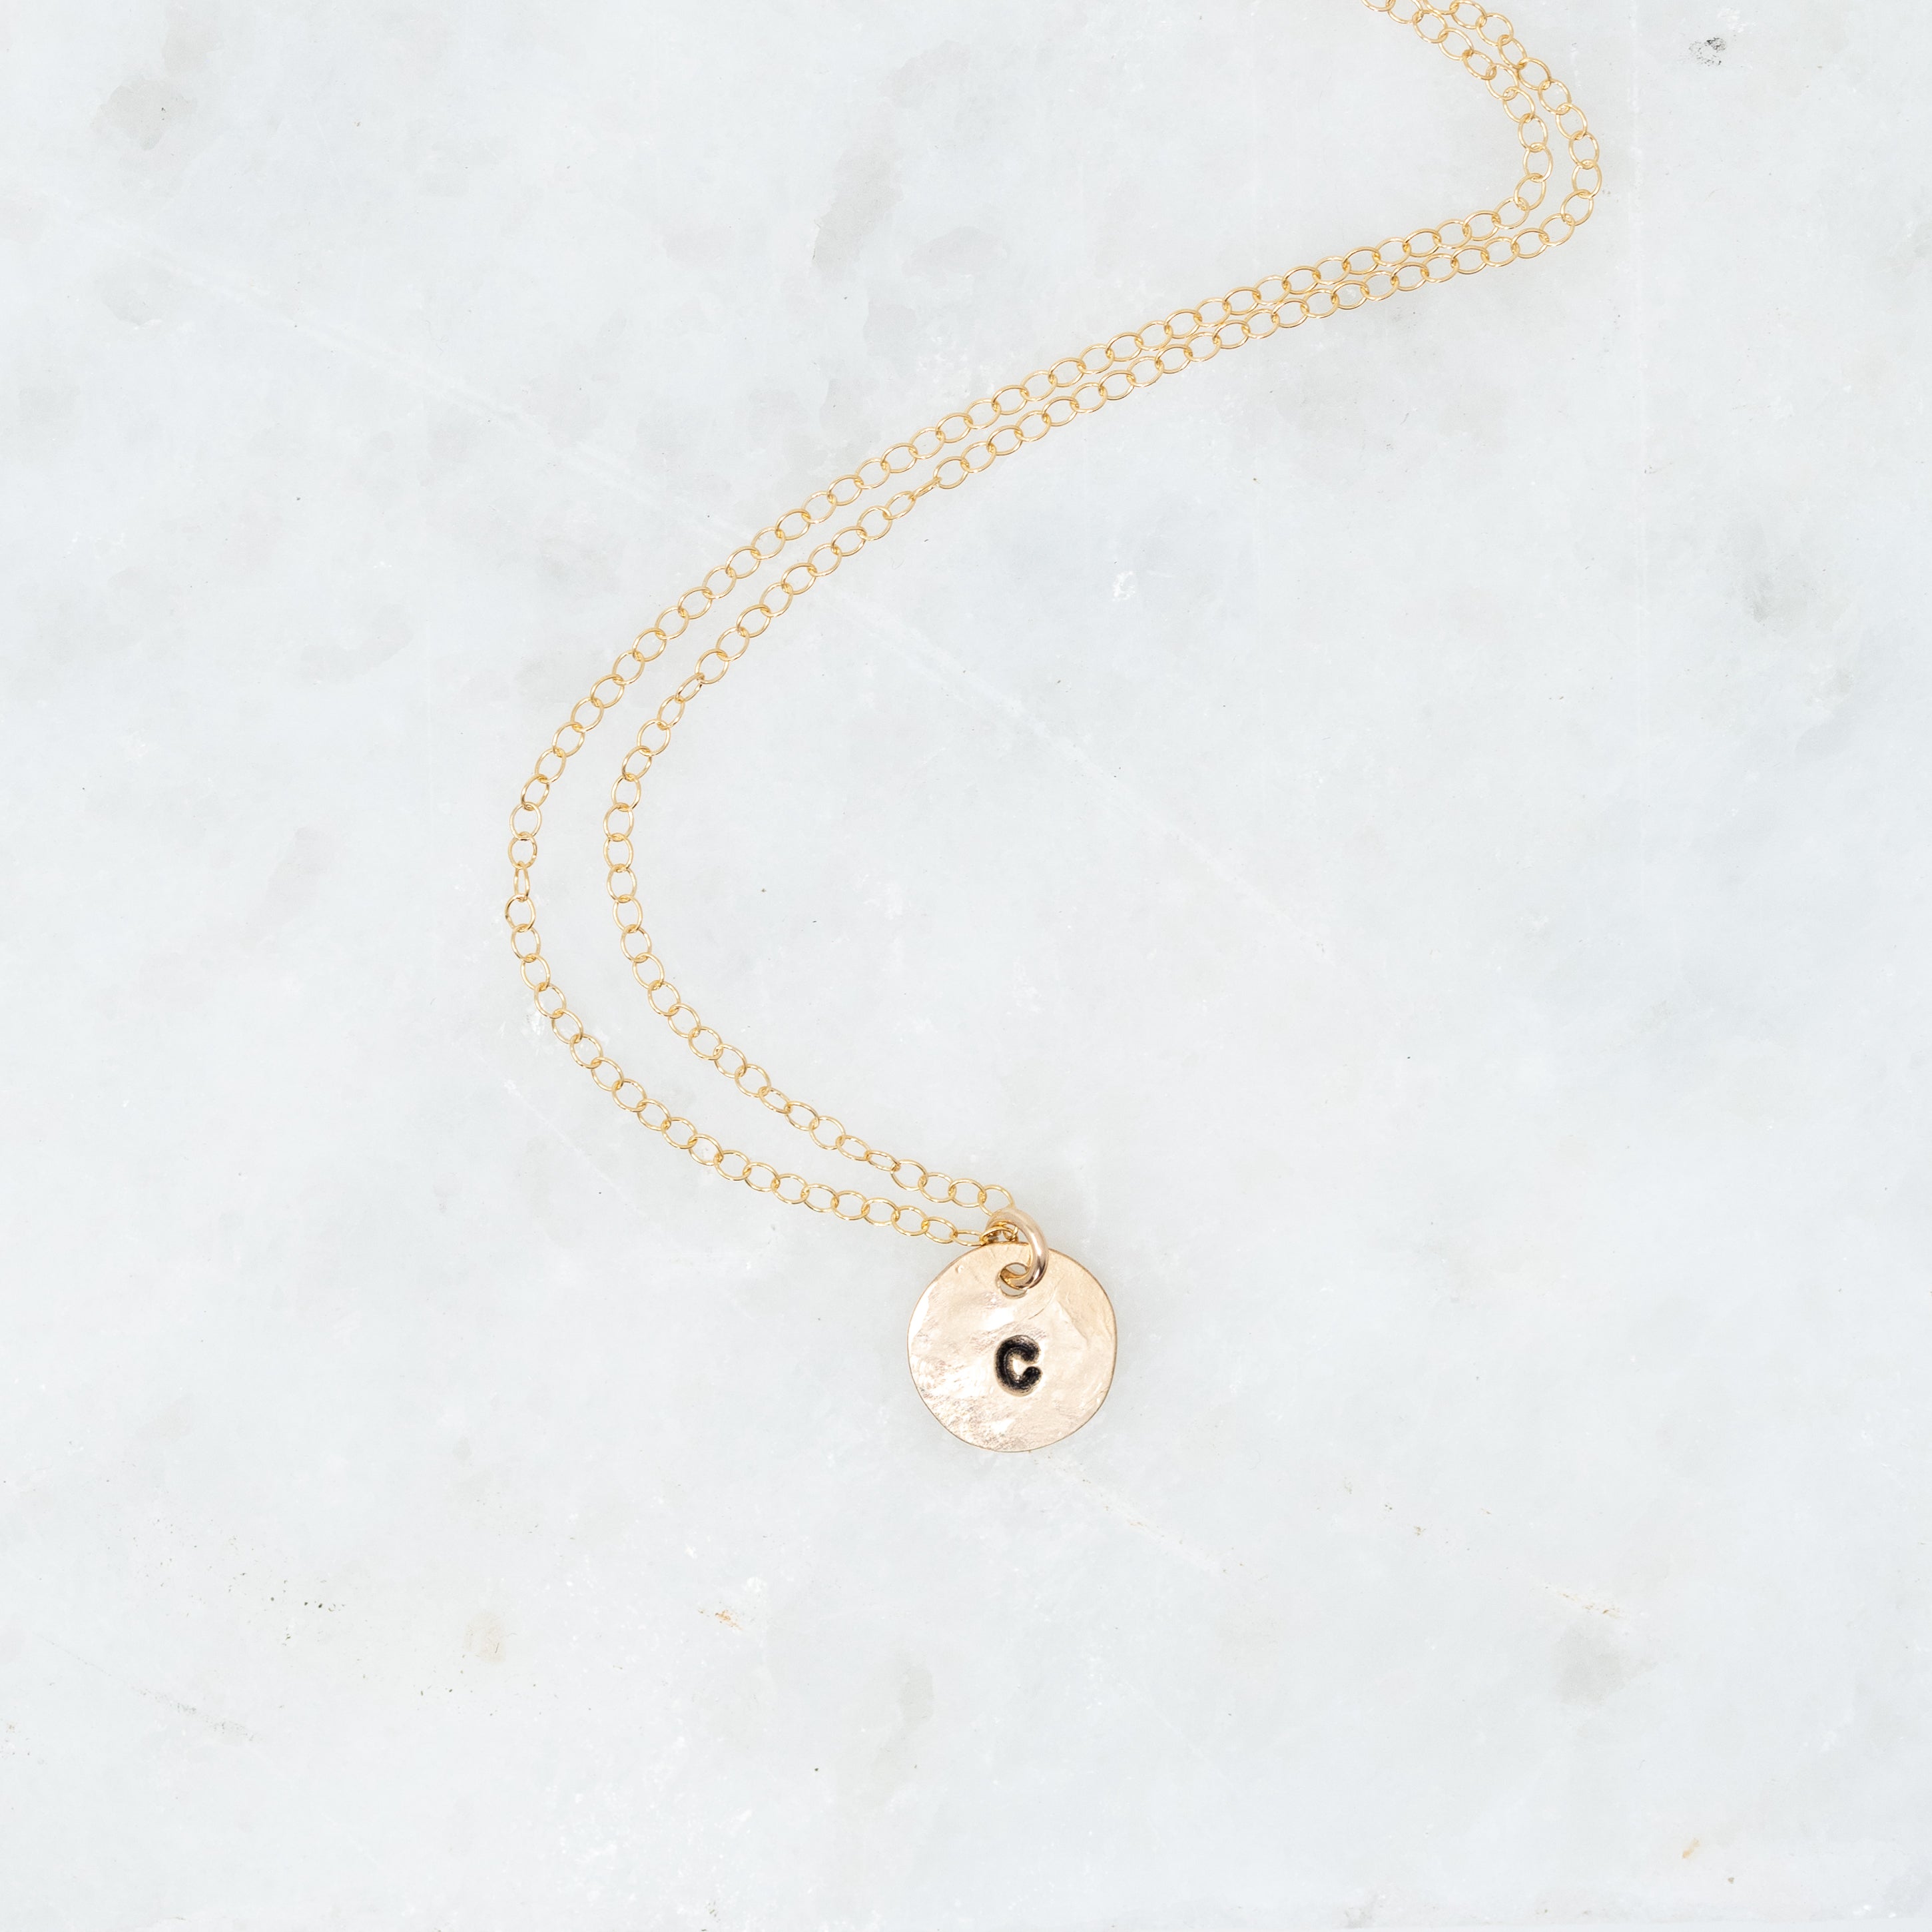 Tiny gold filled circle with initials stamped onto it. On a gold chain. 